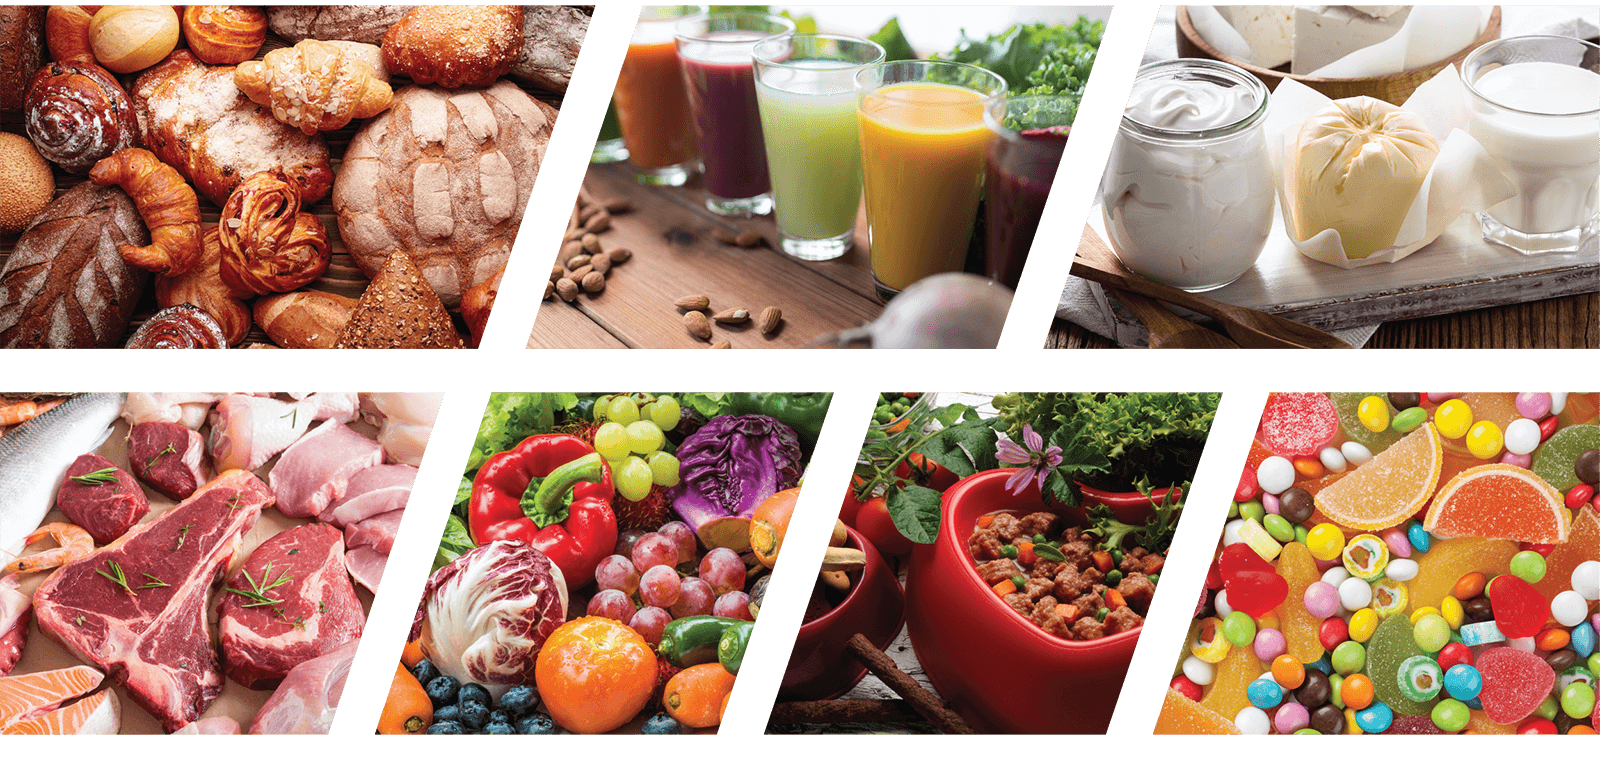 A collage of various food and beverage processing markets including bakeries, beverages, dairy, meat, seafood, produce, pet food, and confectionary.